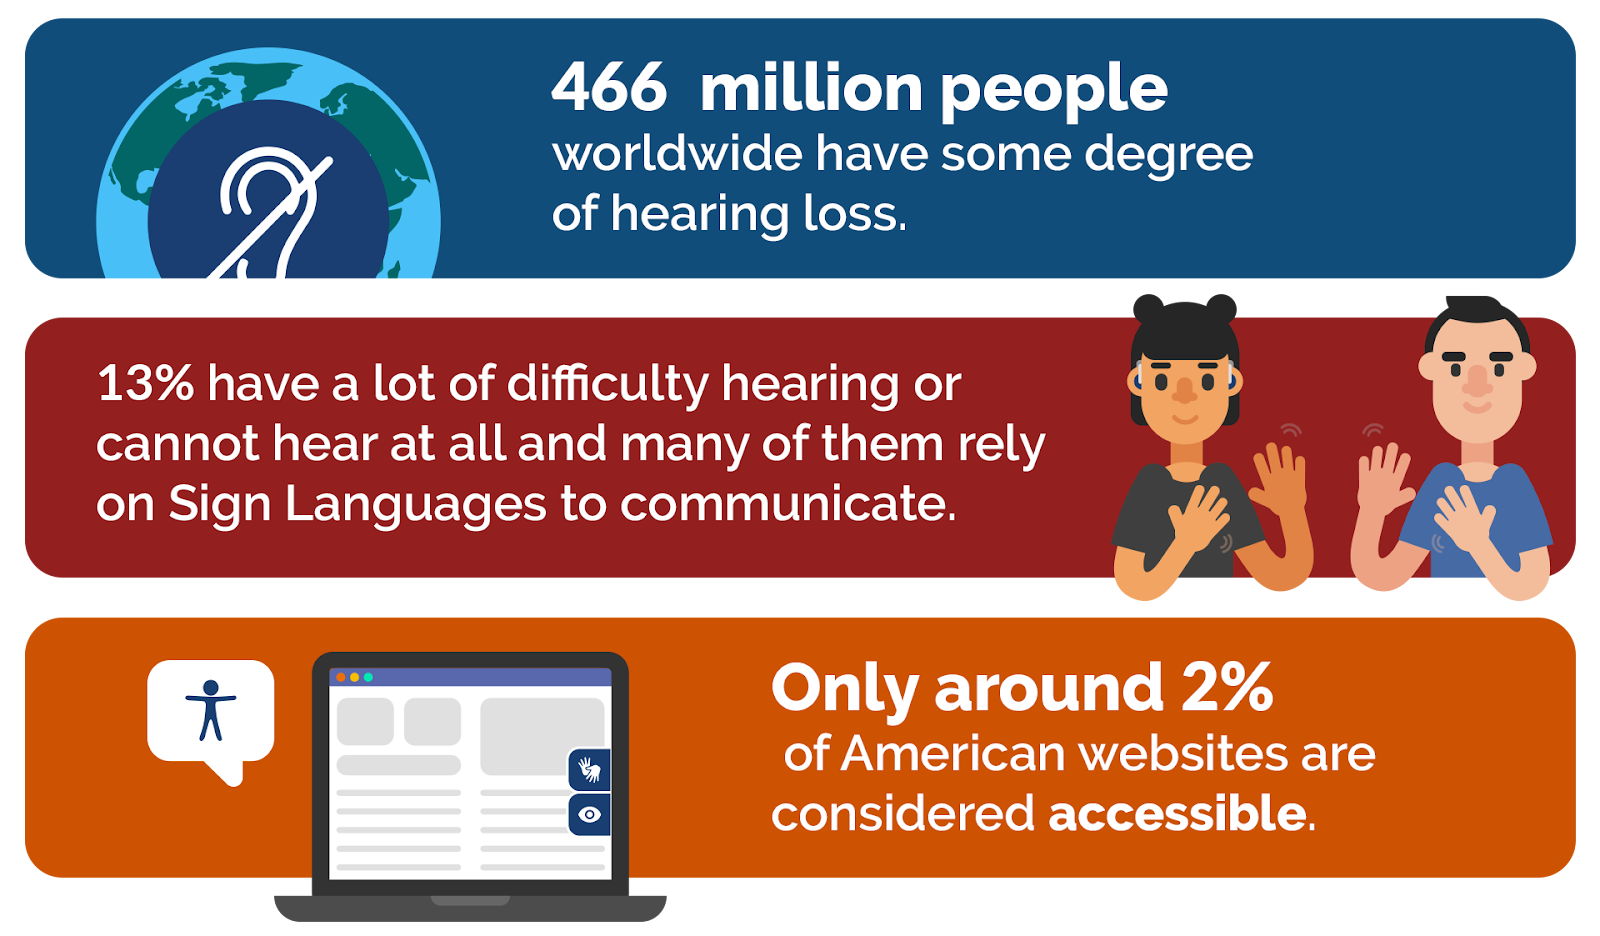 At the top, there is a blue banner with the illustration of planet Earth and the deafness icon. Beside it, it reads "466 million people worldwide have some degree of hearing loss".
On the middle, there is a red banner with the illustration of two people communicating in ASL. Beside it, it reads "13% have a lot of difficulty hearing or cannot hear at all and many of them rely on Sign Languages to communicate".
At the bottom, there is an orange banner with the illustration of a computer with the Hand Talk Plugin and the accessibility icon. Beside it, it reads "only around 2% of American websites are considered accessible".